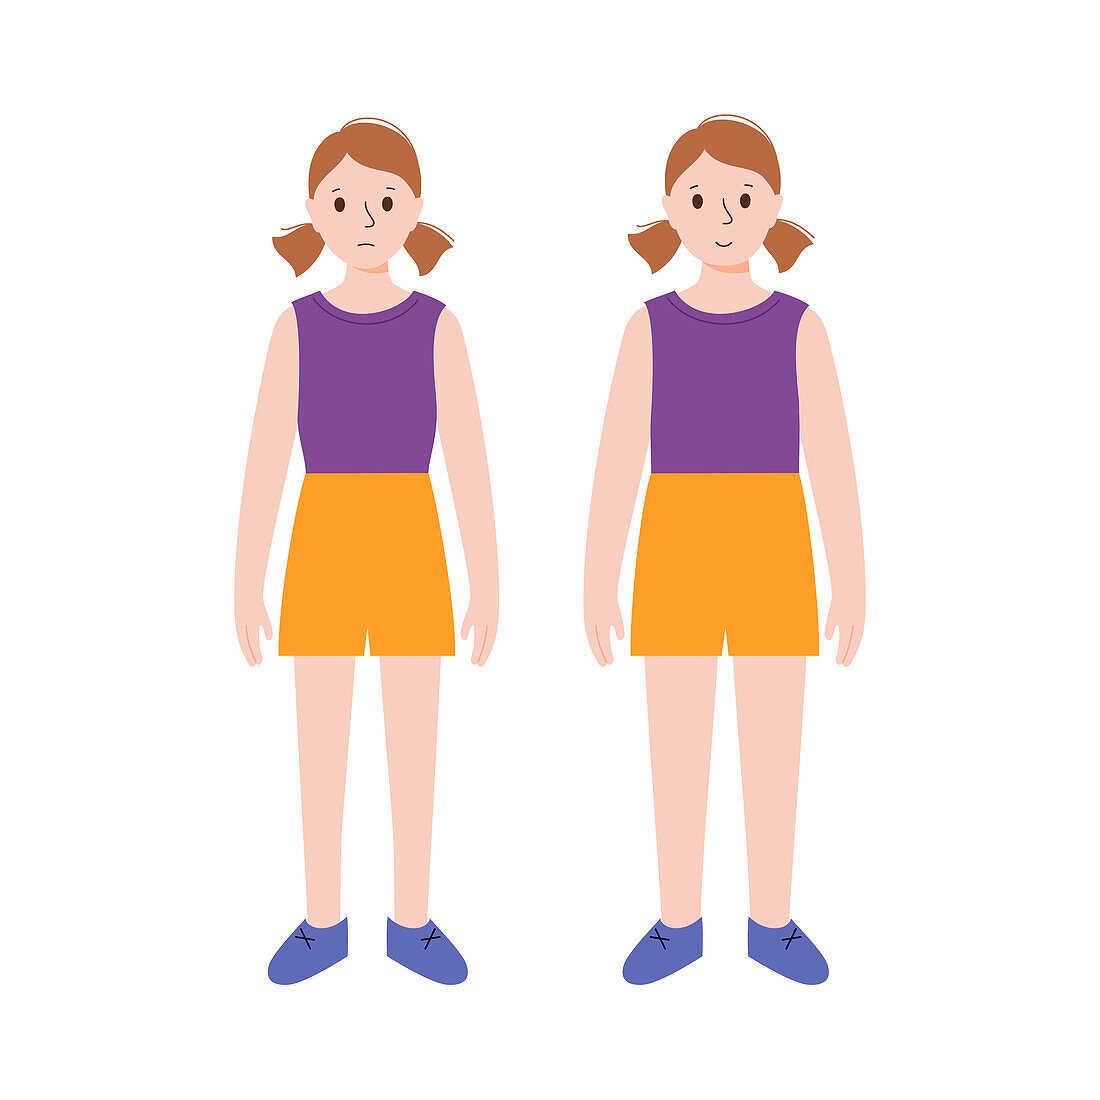 Underweight and normal weight girl, illustration